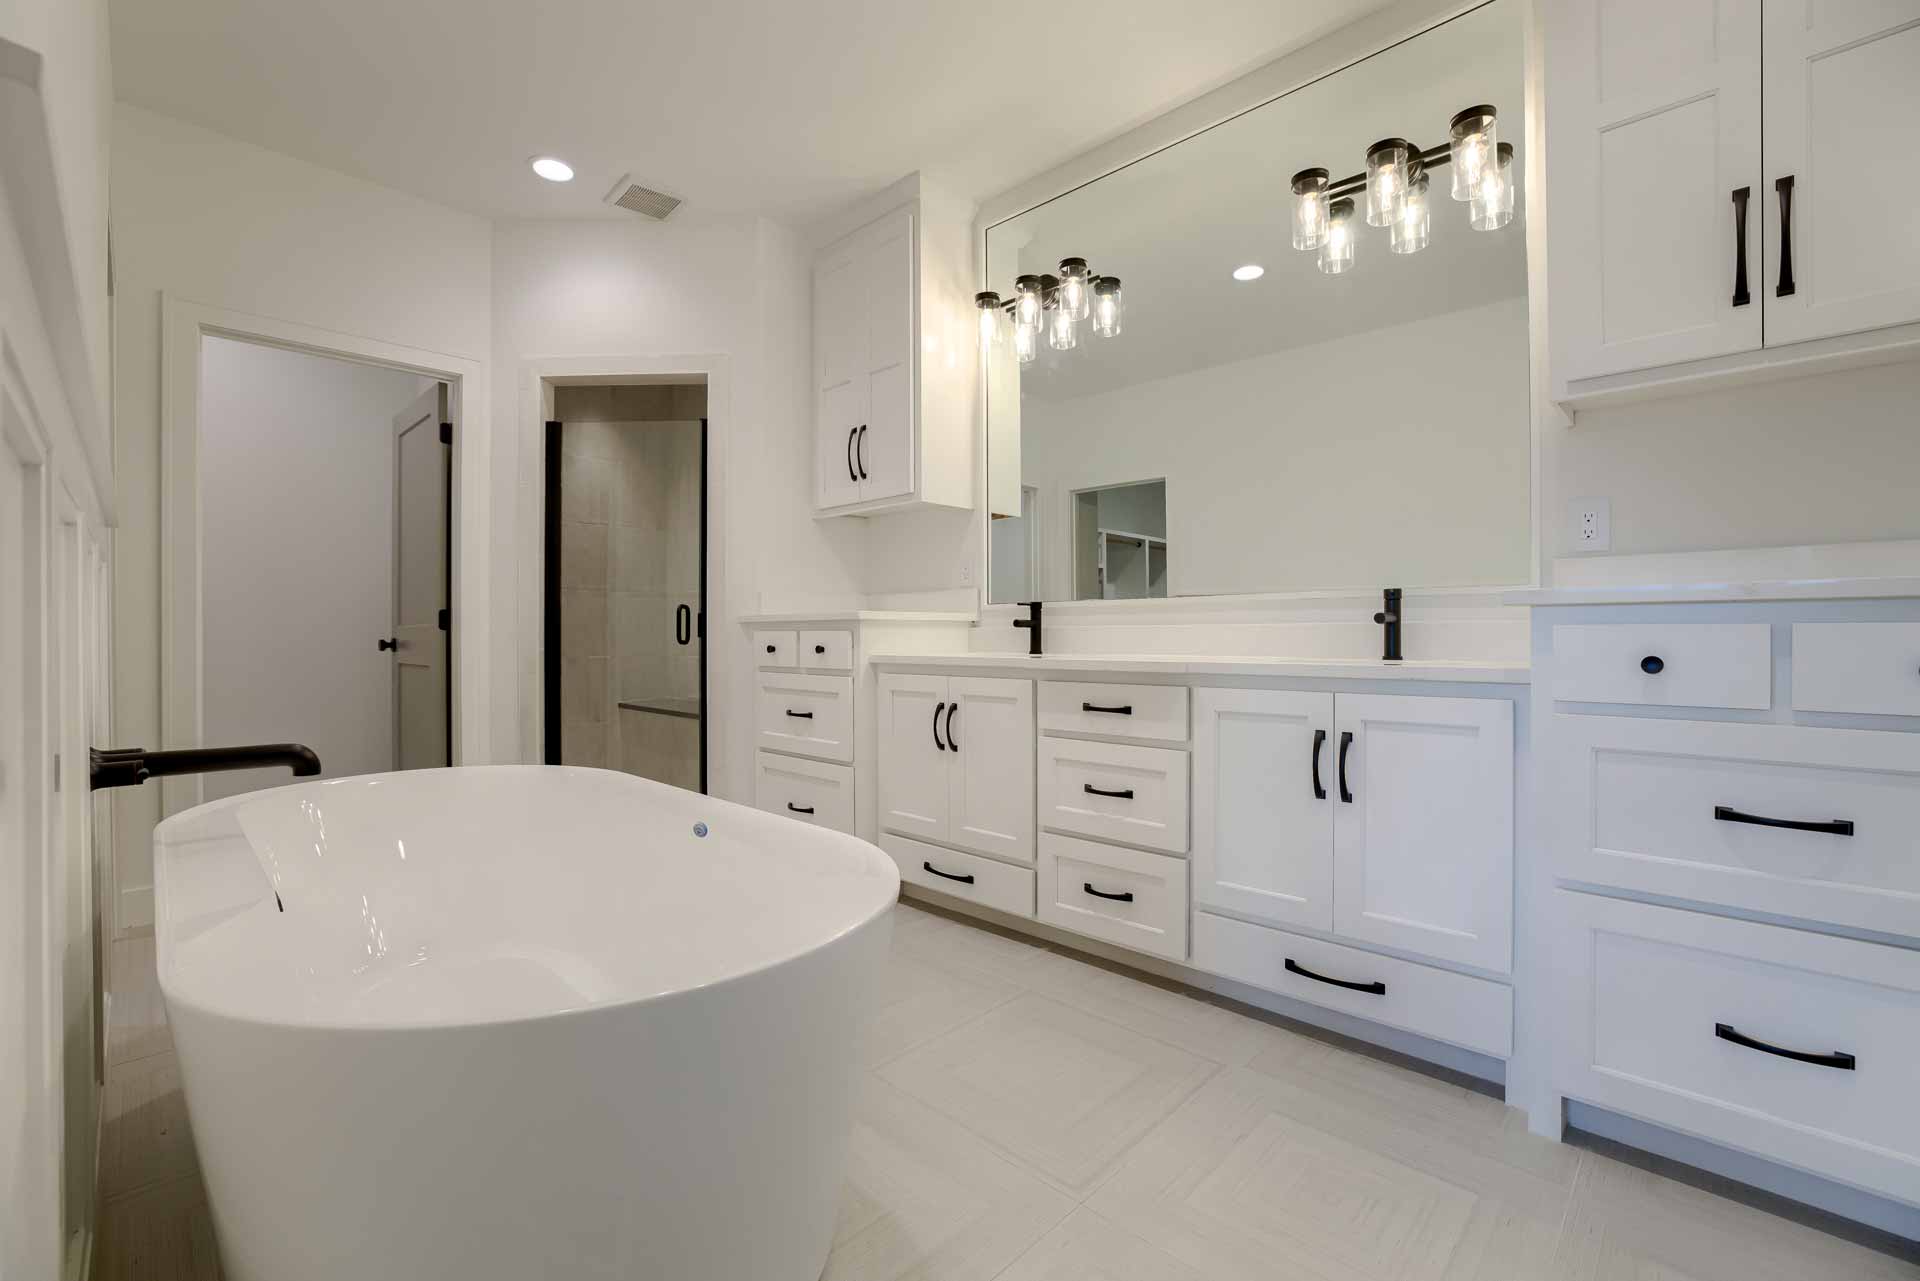 Master bathroom with double vanity and large tub